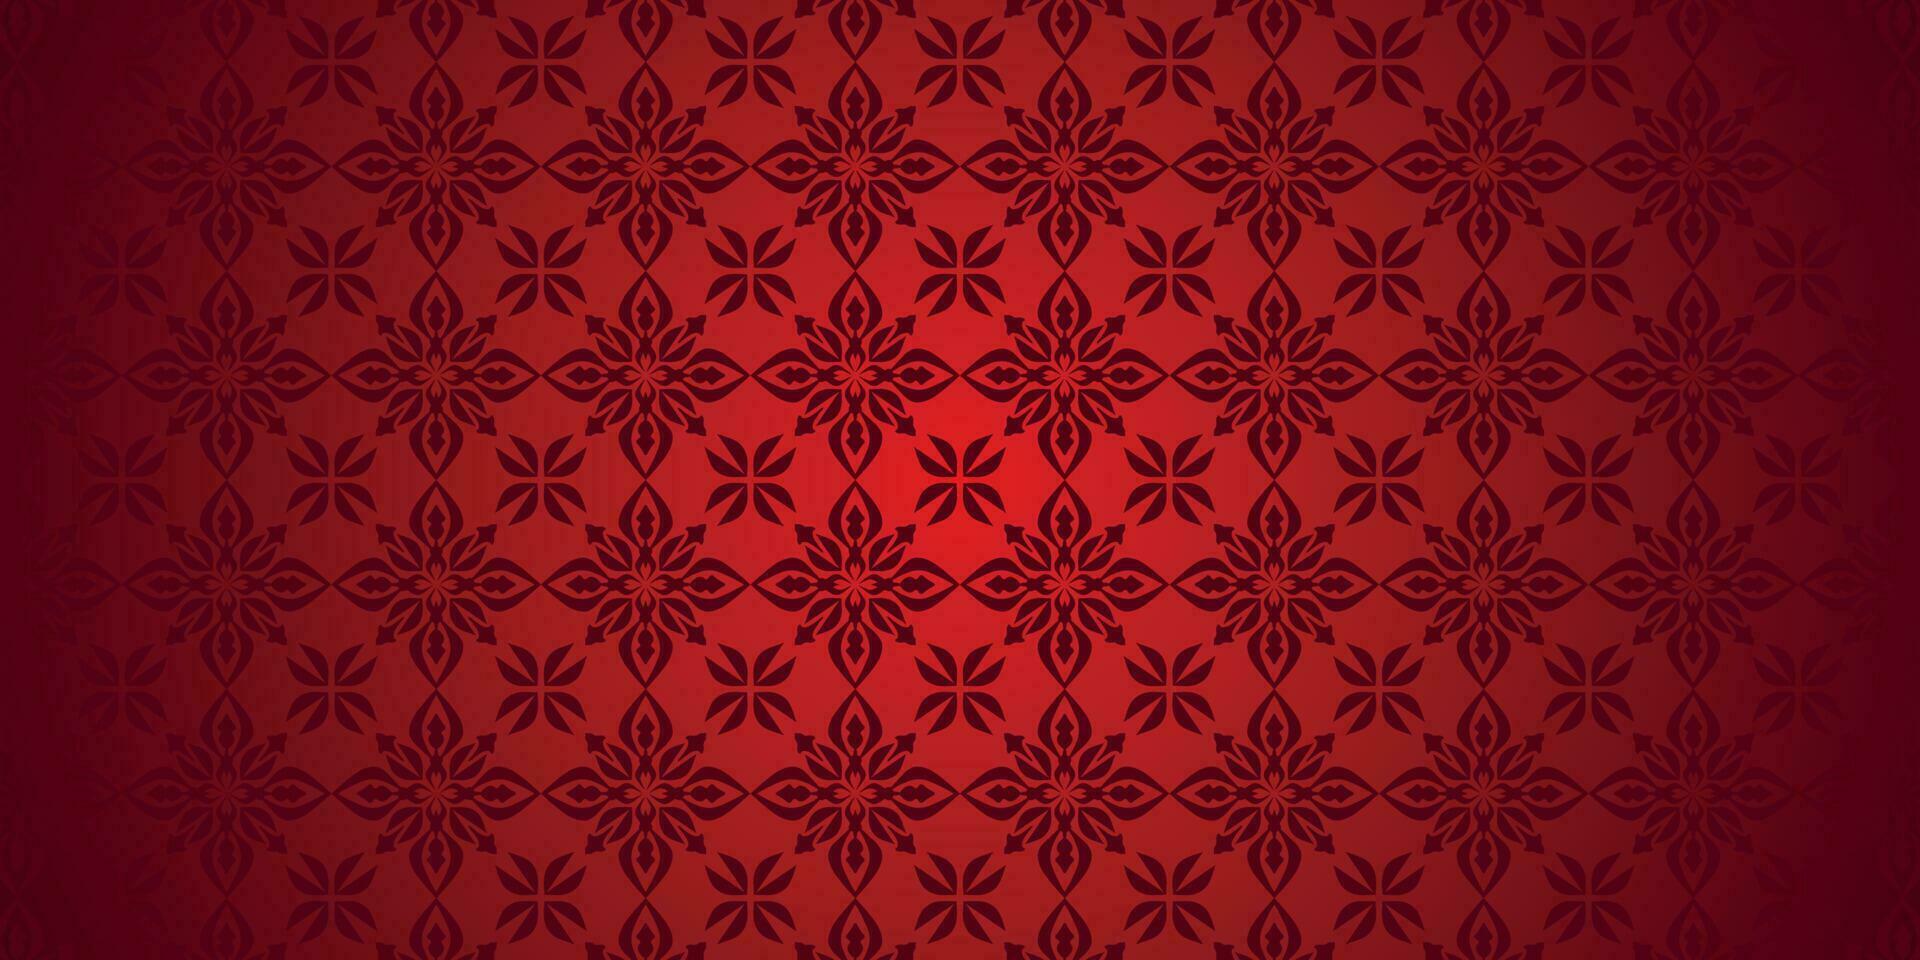 Arabic pattern red pattern background vector